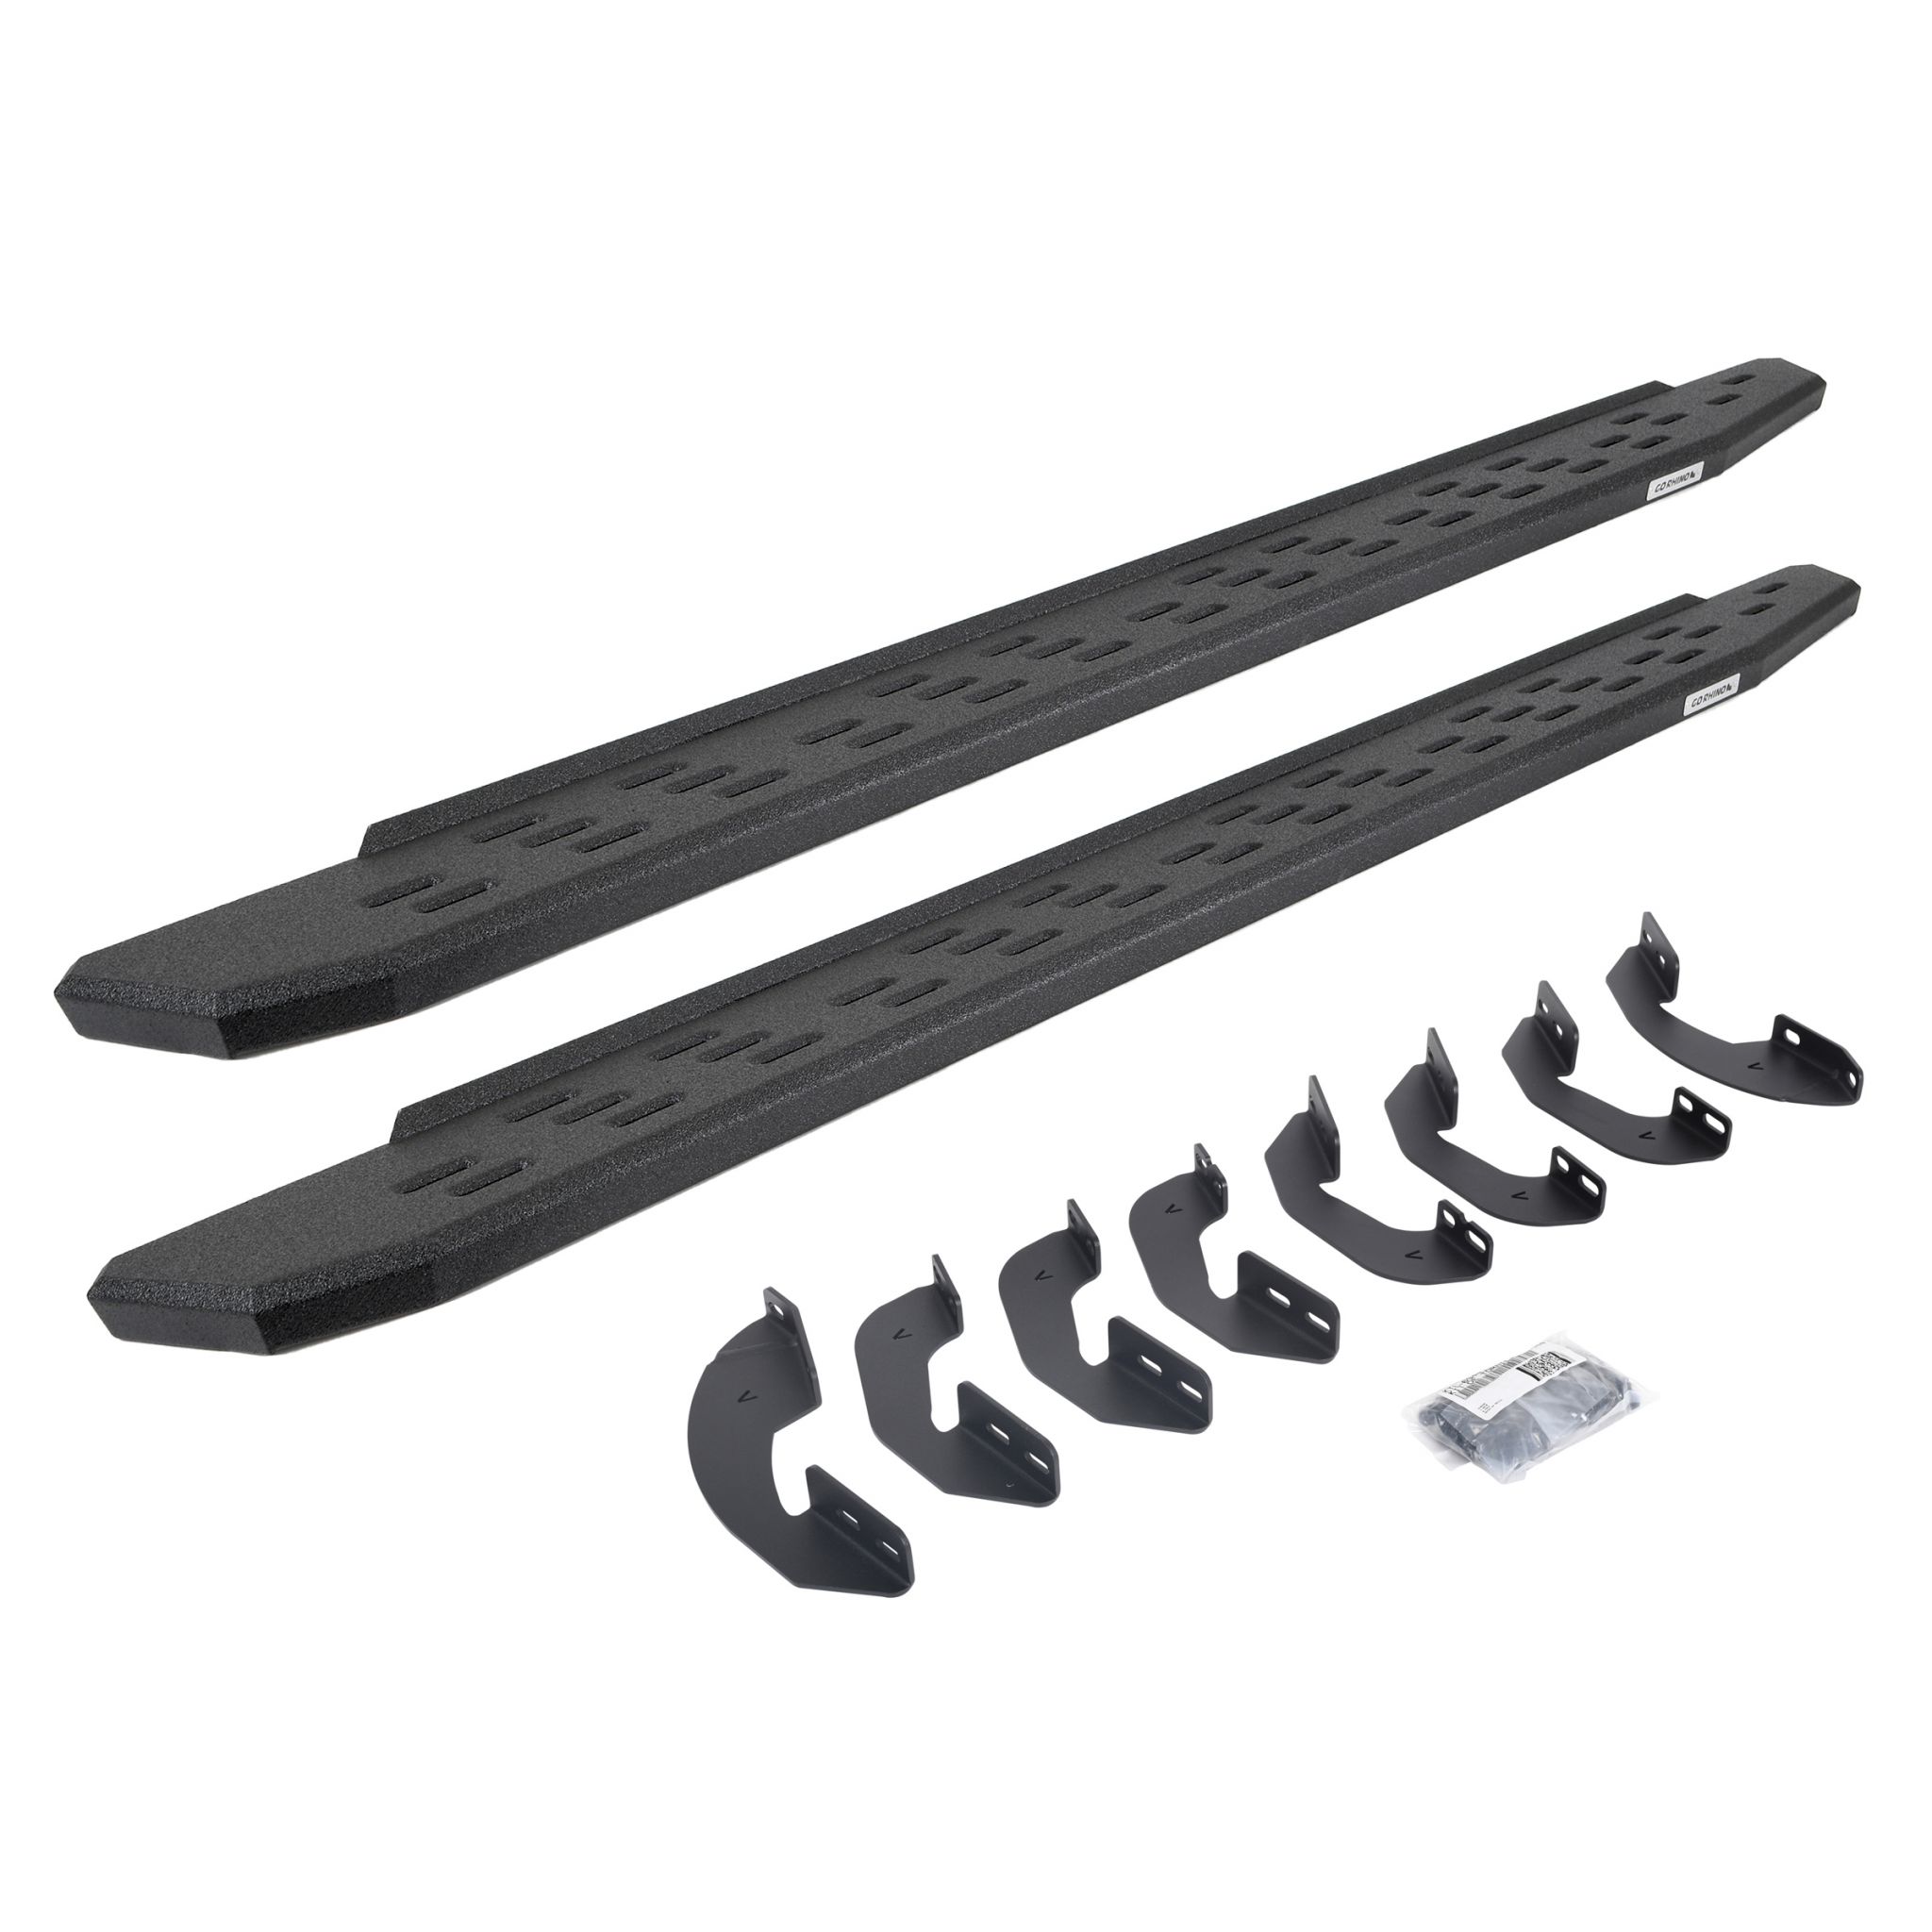 Go Rhino 69641580T - RB30 Running Boards with Mounting Bracket Kit - Protective Bedliner Coating